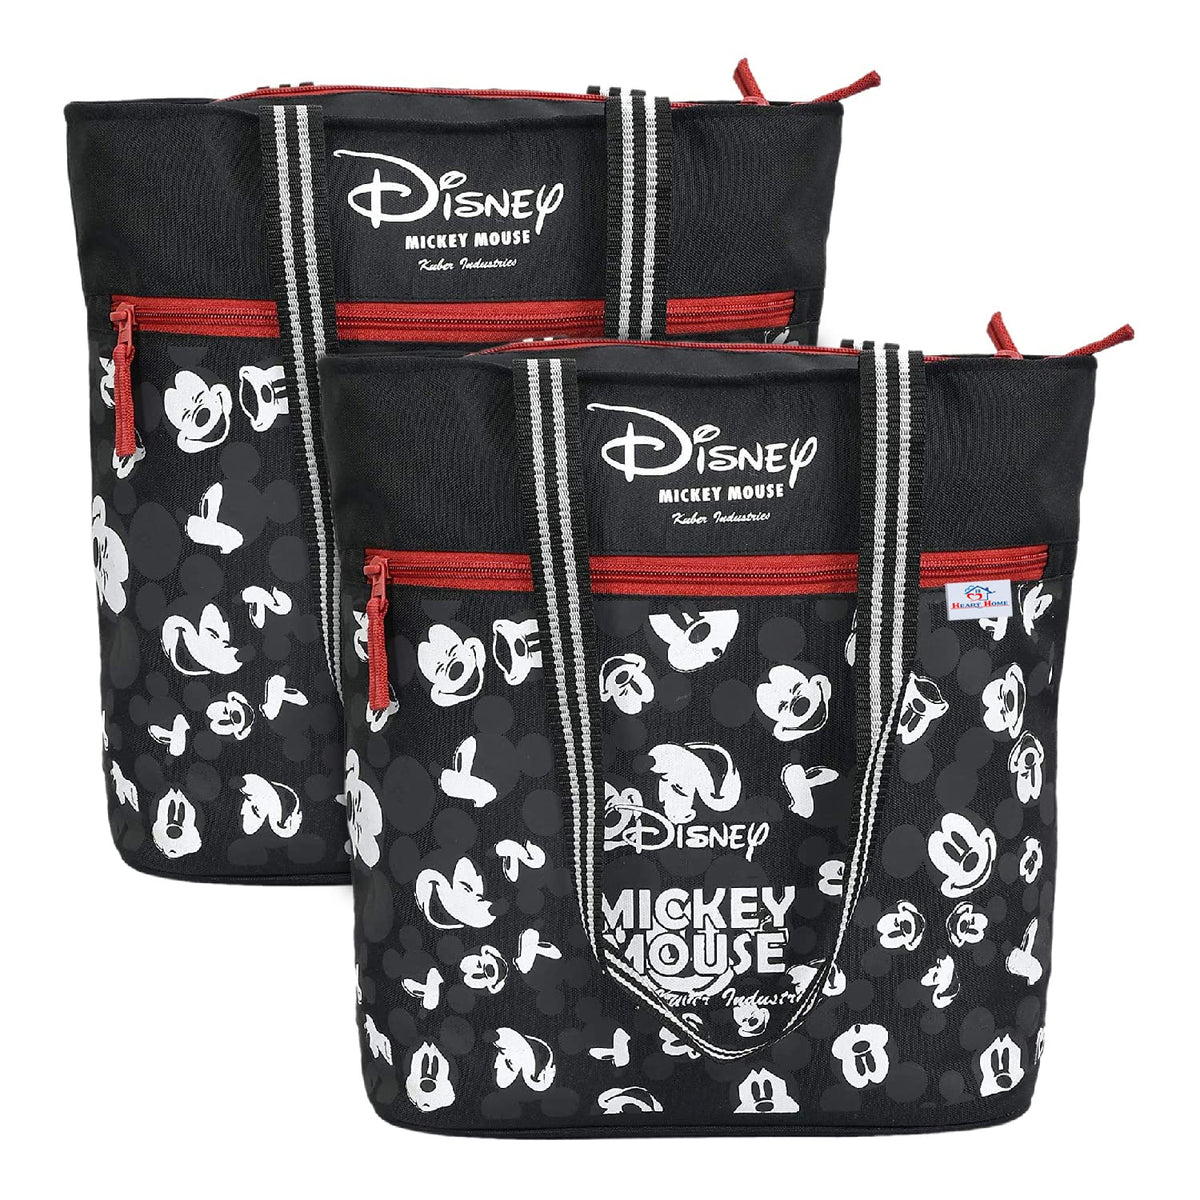 Heart Home Polyester Disney Mickey Mouse Print Attractive & Foldable Grocery|Shopping|Travel Hand Bag with Front Pocket & Handle, Pack of 2 (Black)